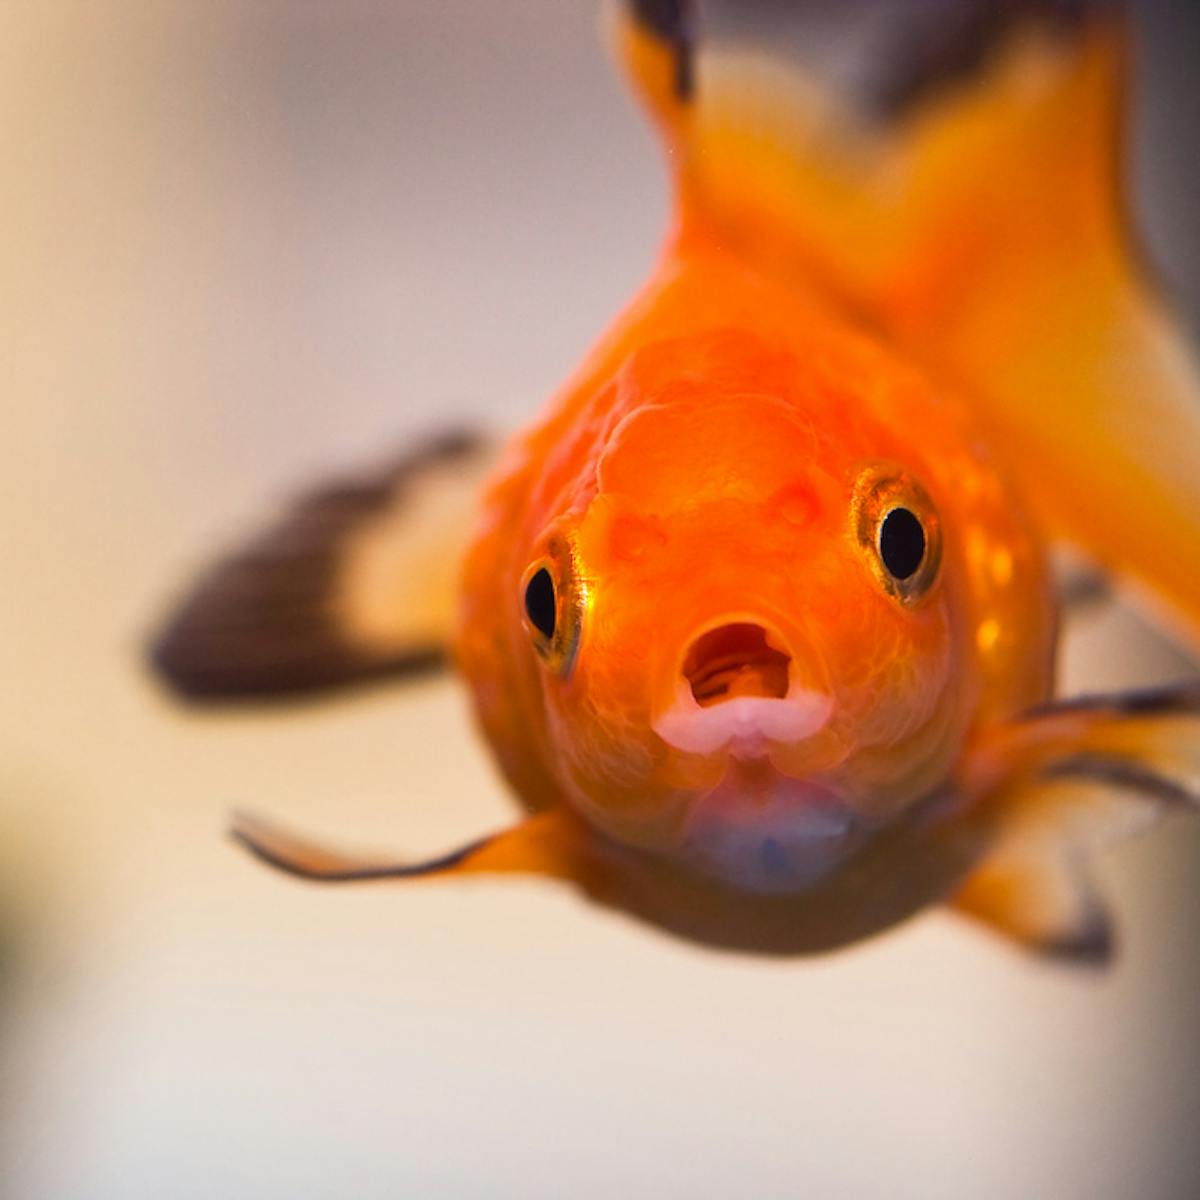 The goldfish test that can change your behaviour